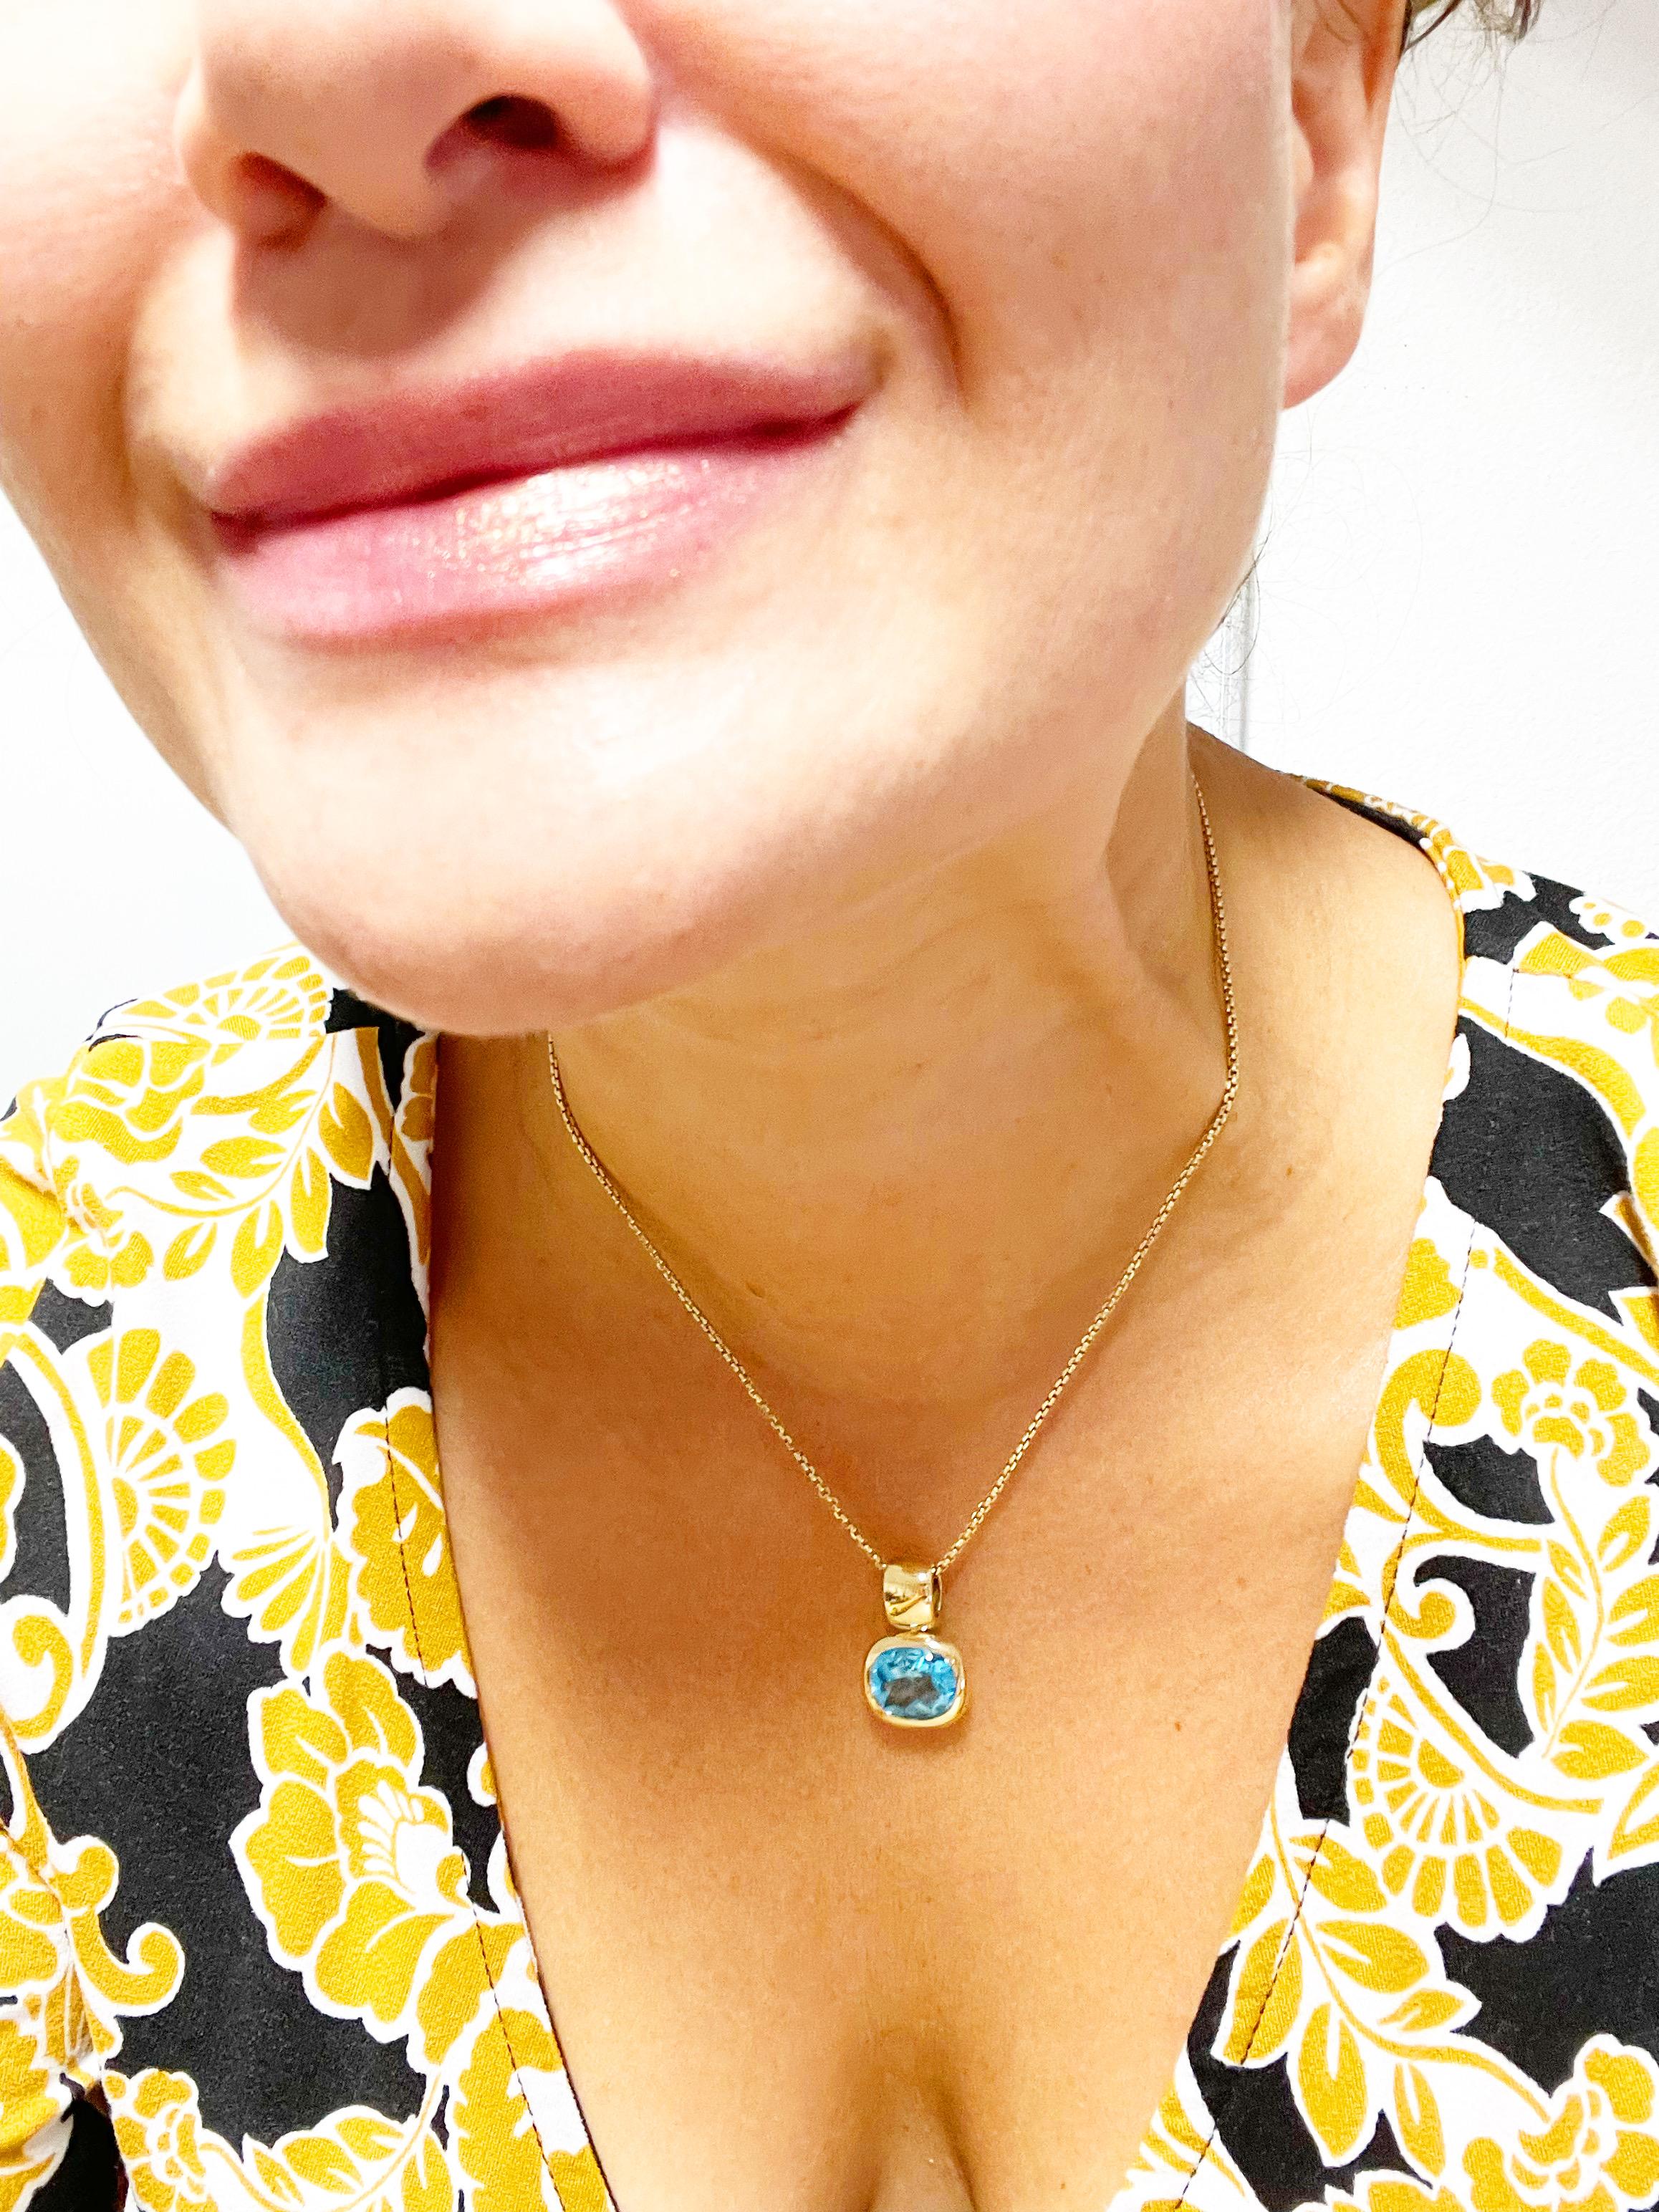 Exquisite beauty. Swiss blue topaz in 18KT yellow gold. Bezel setting like no other, this pendant necklace is simple yet made with such great quality and bold feeling. Definitly a luxurious piece to own by H.Stern.

PENDANT:
GRAM WEIGHT: